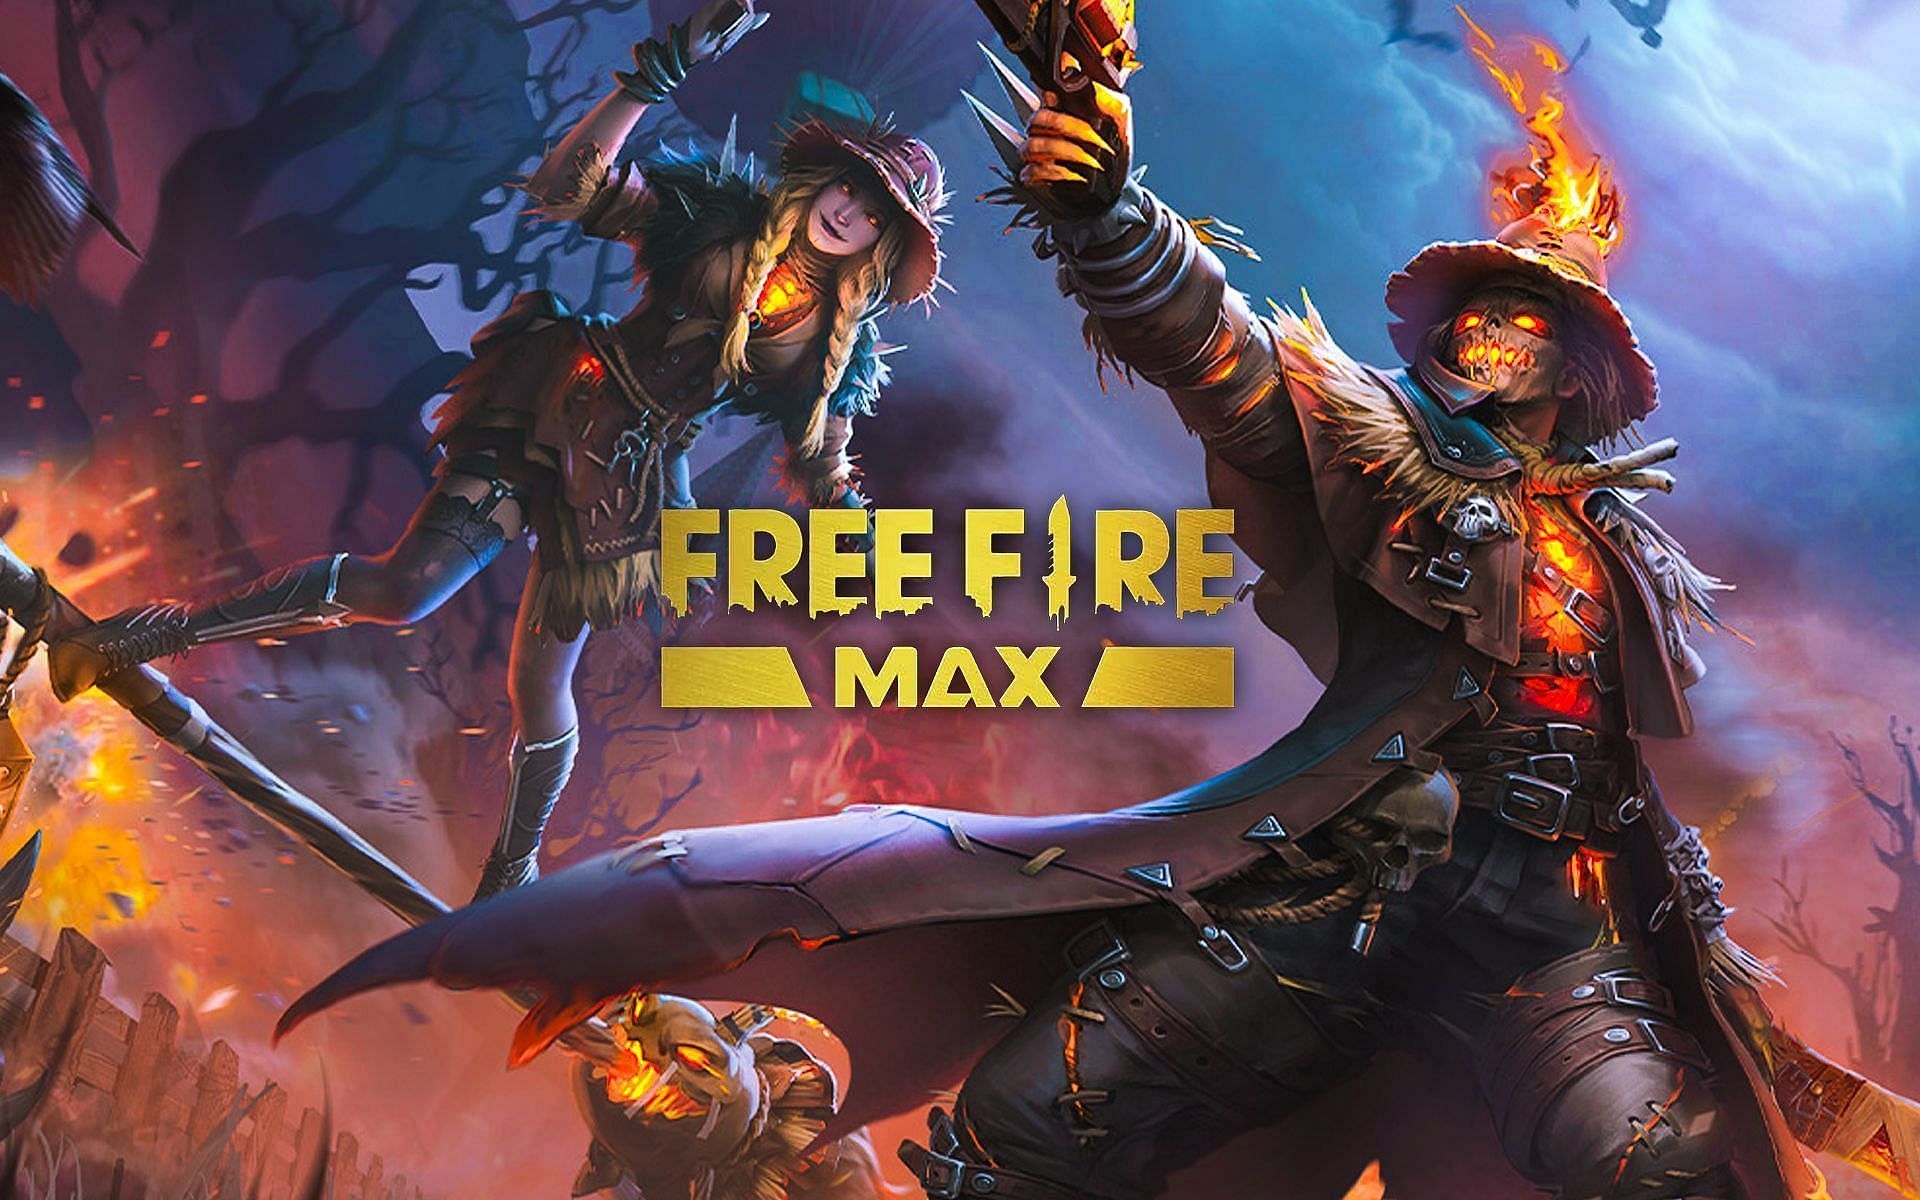 HOW TO DOWNLOAD FREE FIRE MAX, FREE FIRE MAX